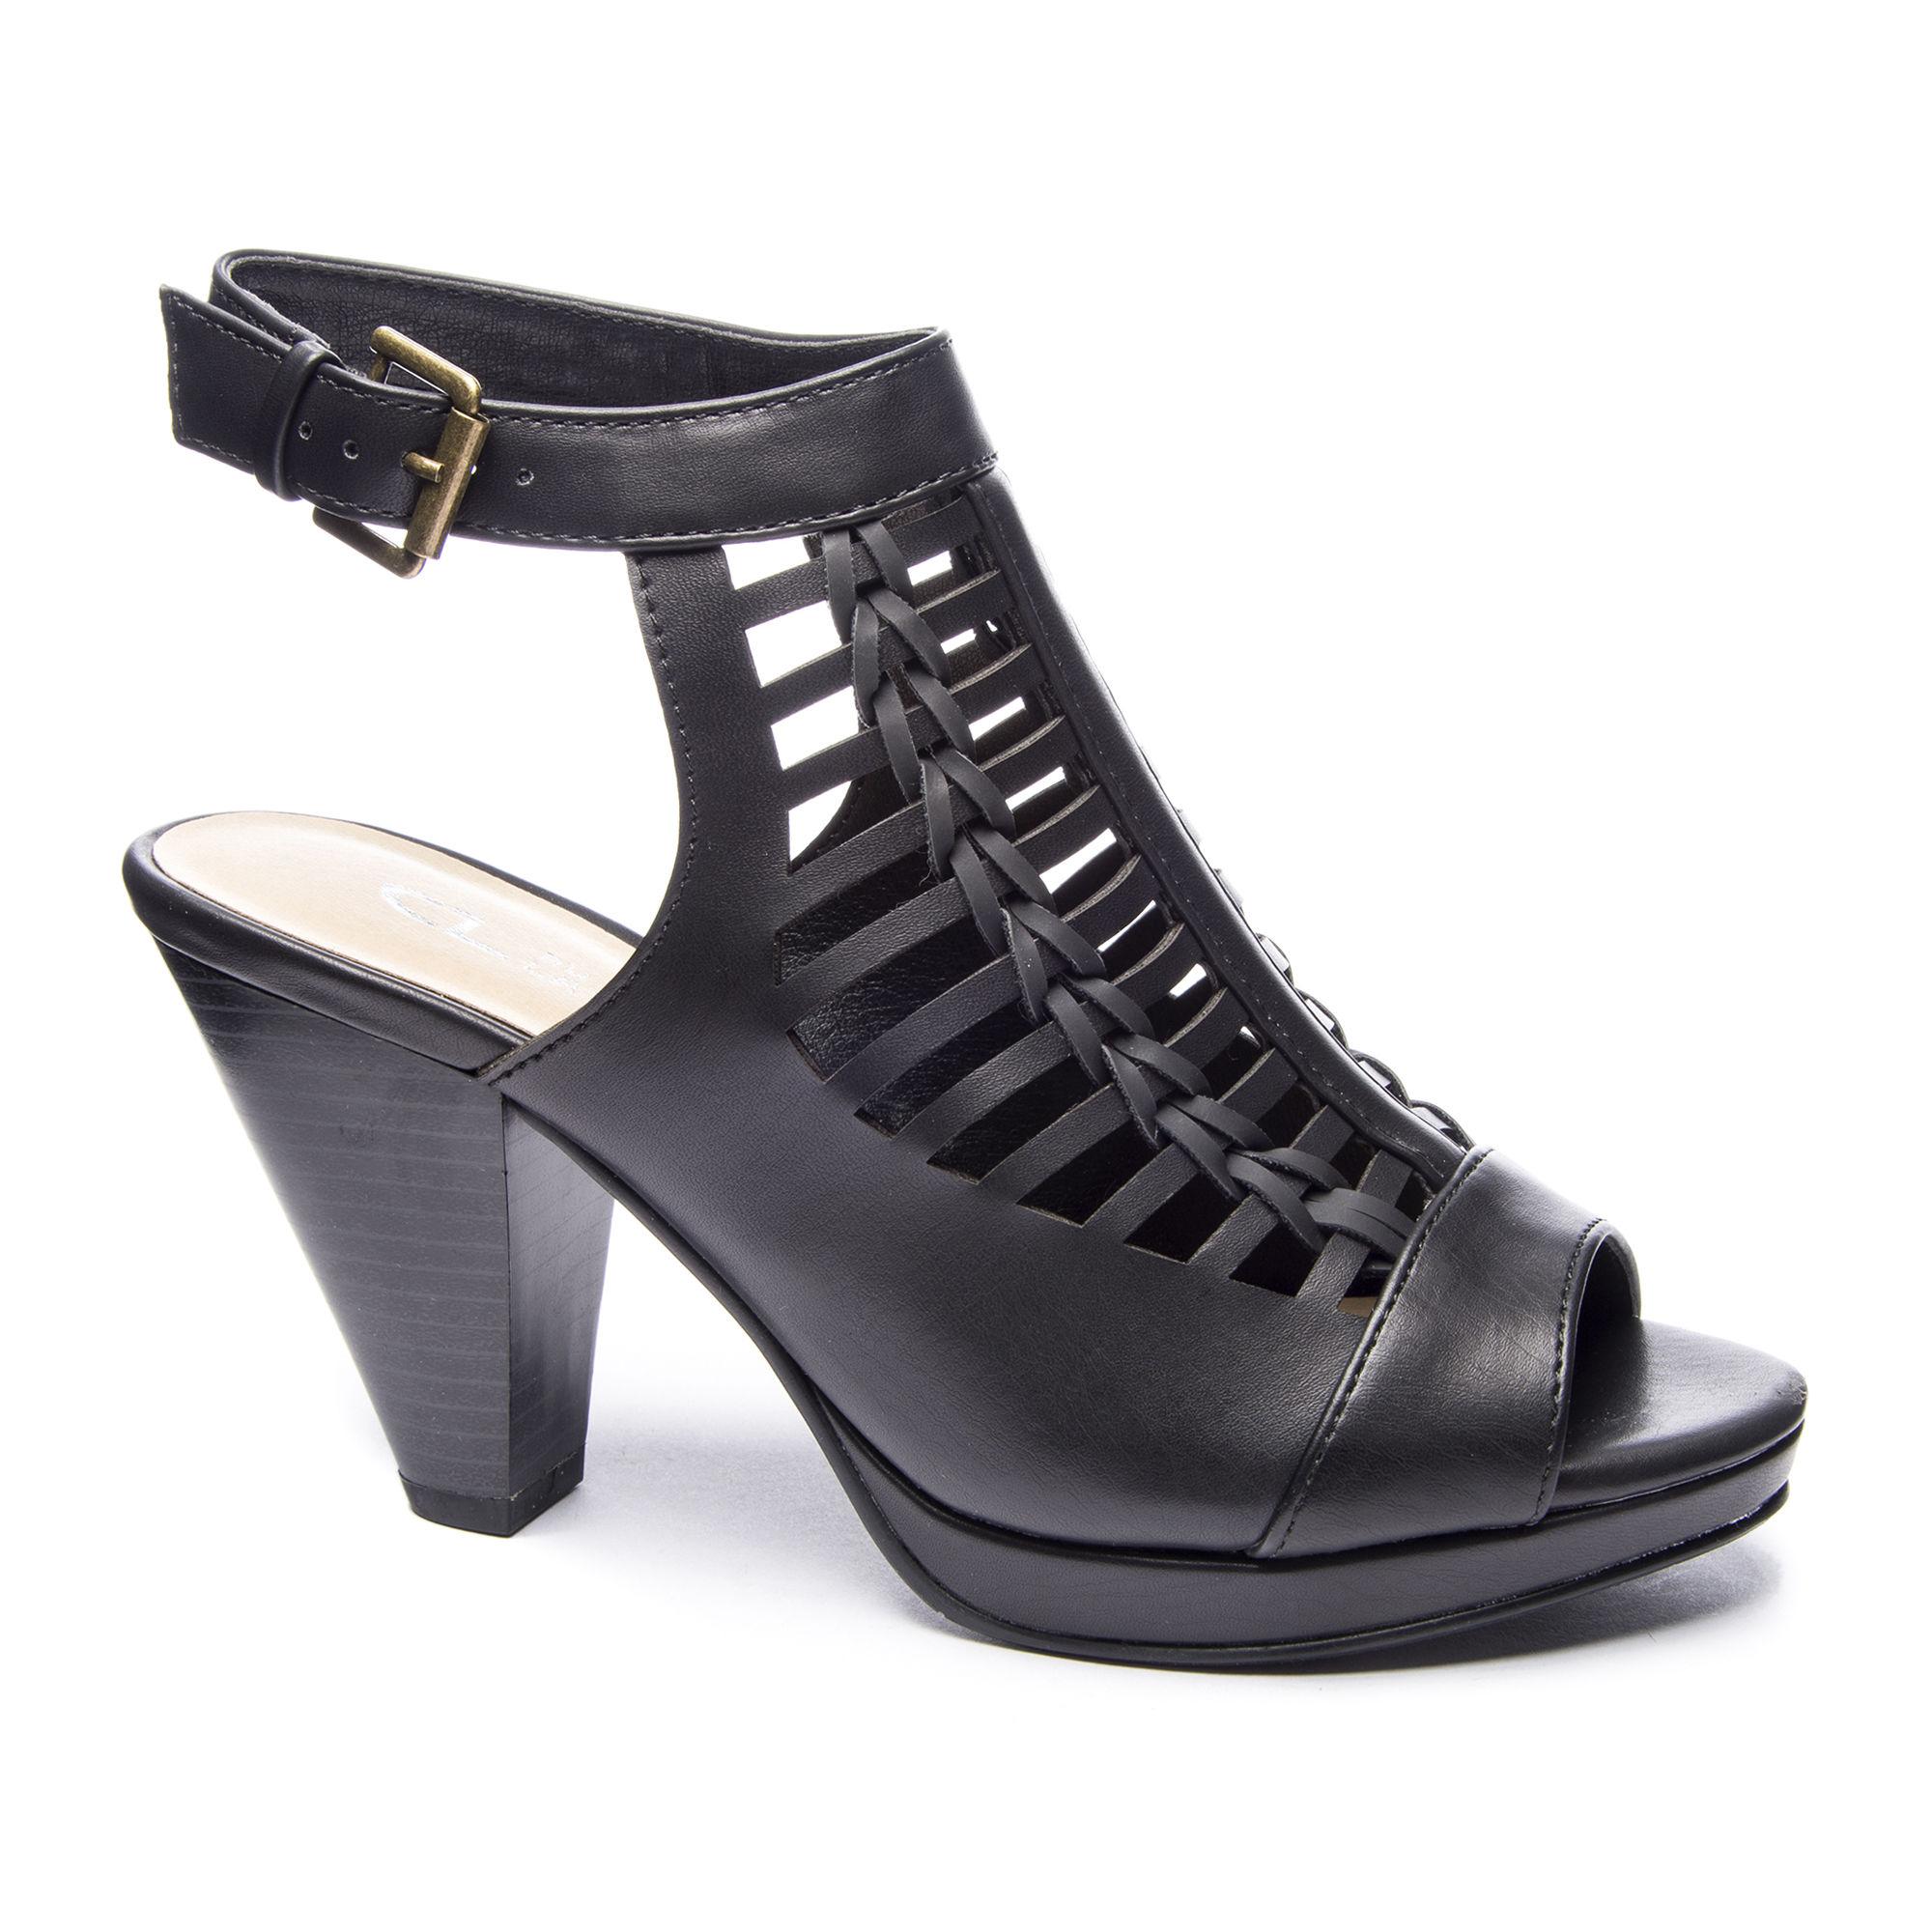 Chinese Laundry Waves Peep-toe Bootie in Black - Lyst